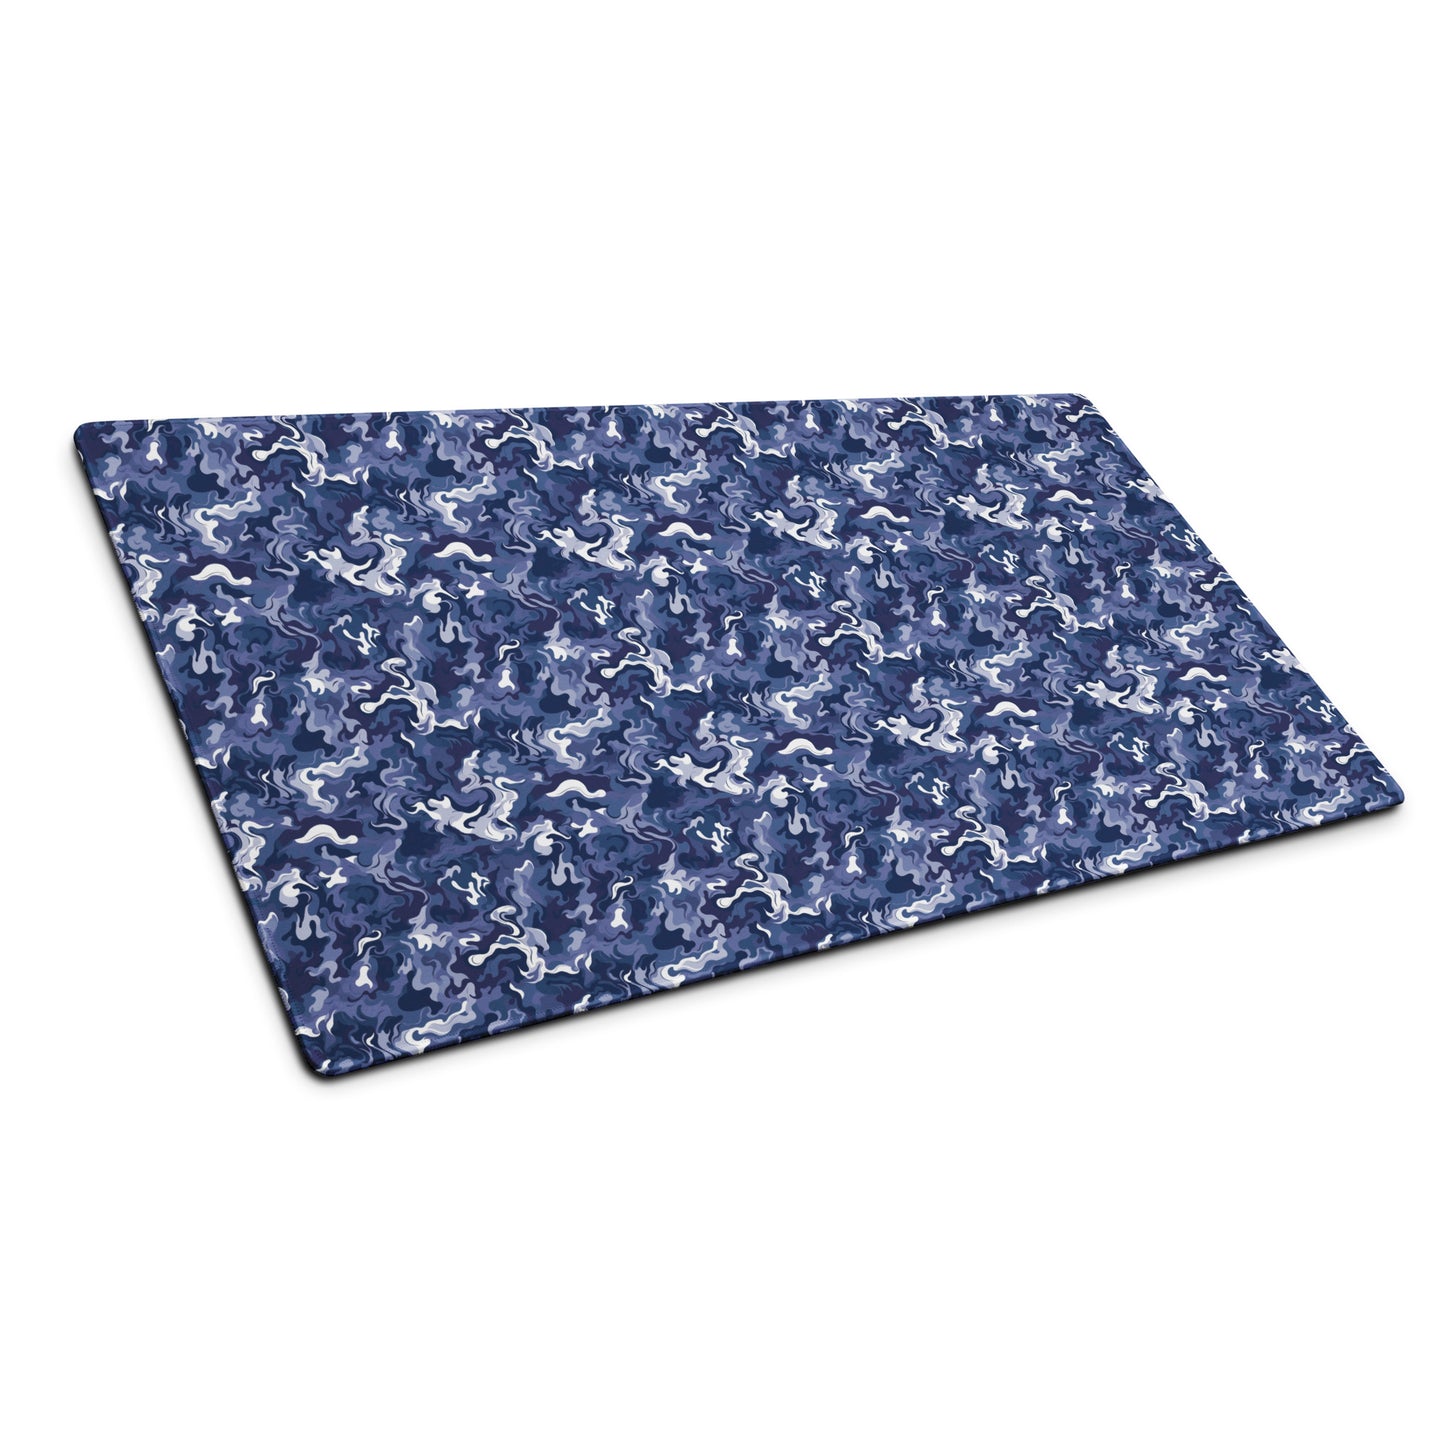 A 36" x 18" desk pad with a royal blue and white camo pattern sitting at an angle.